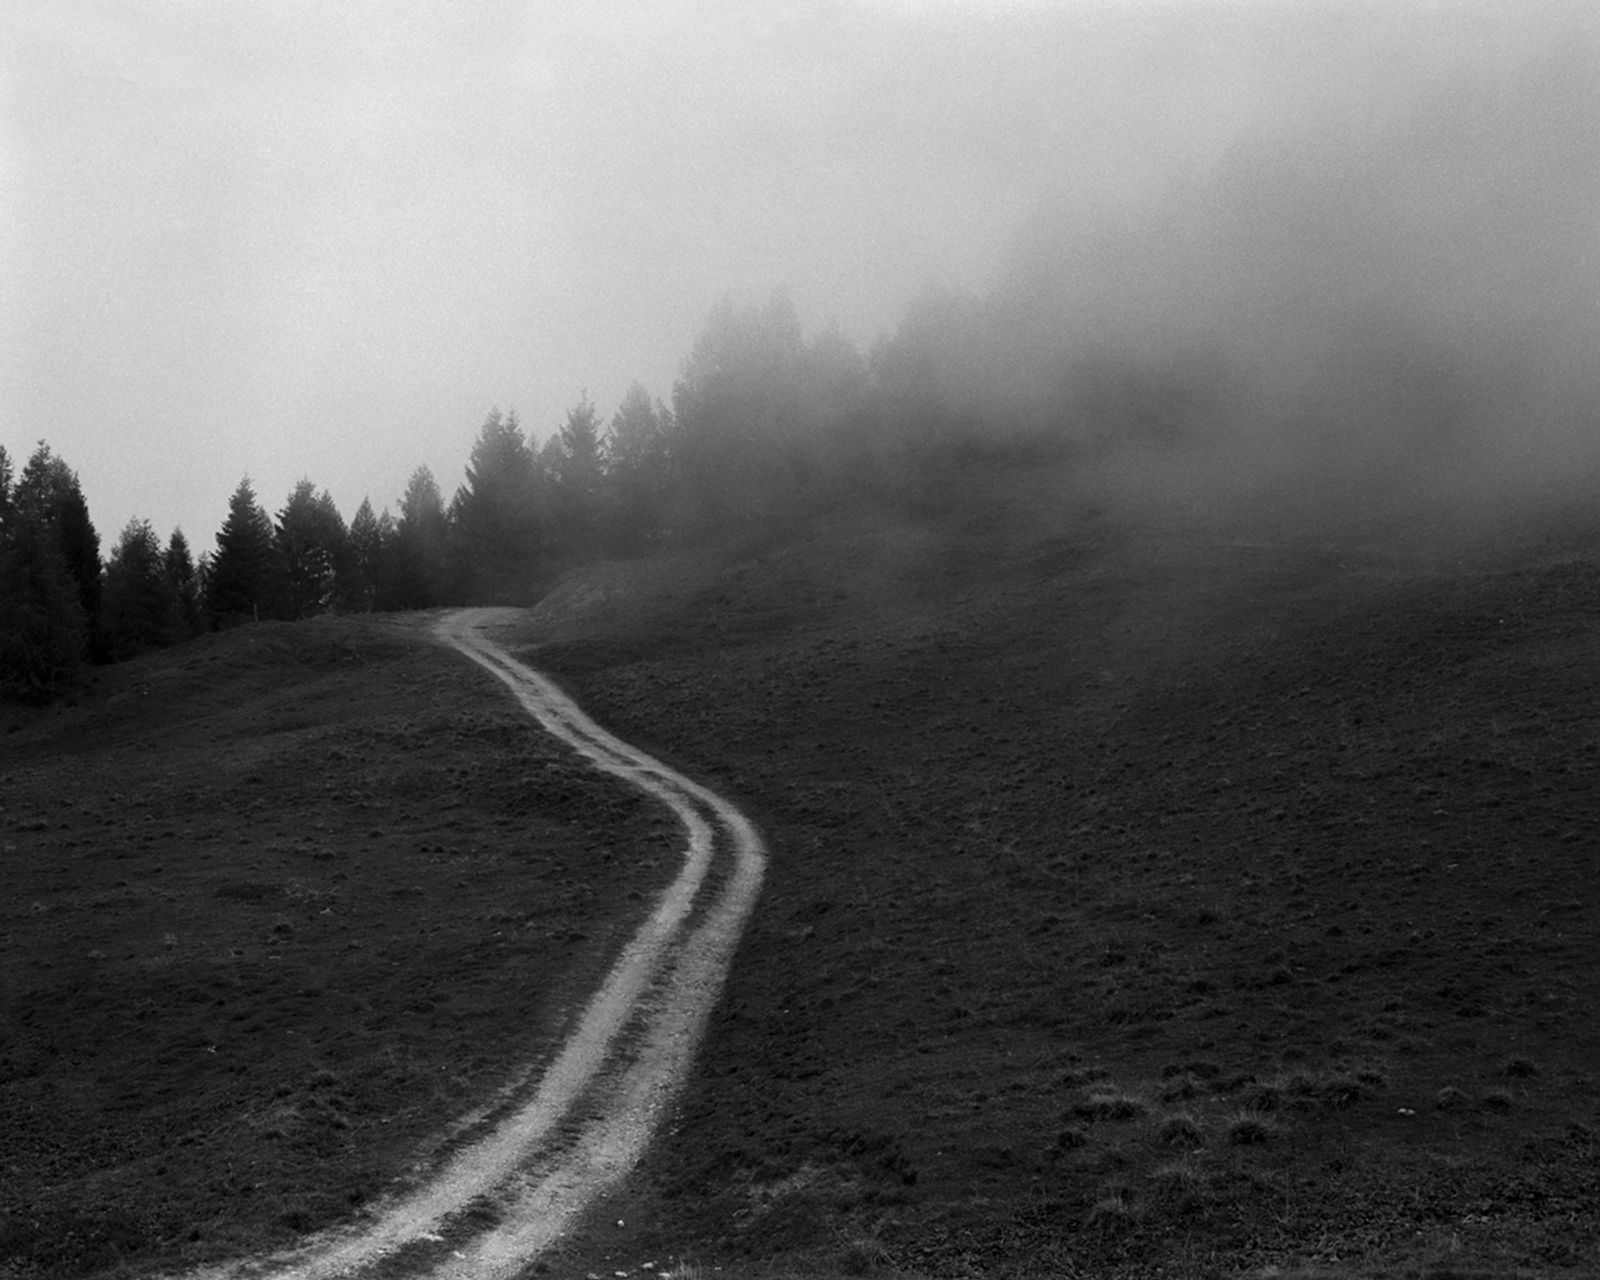 © Giulia Degasperi - Image from the These Dark Mountains photography project